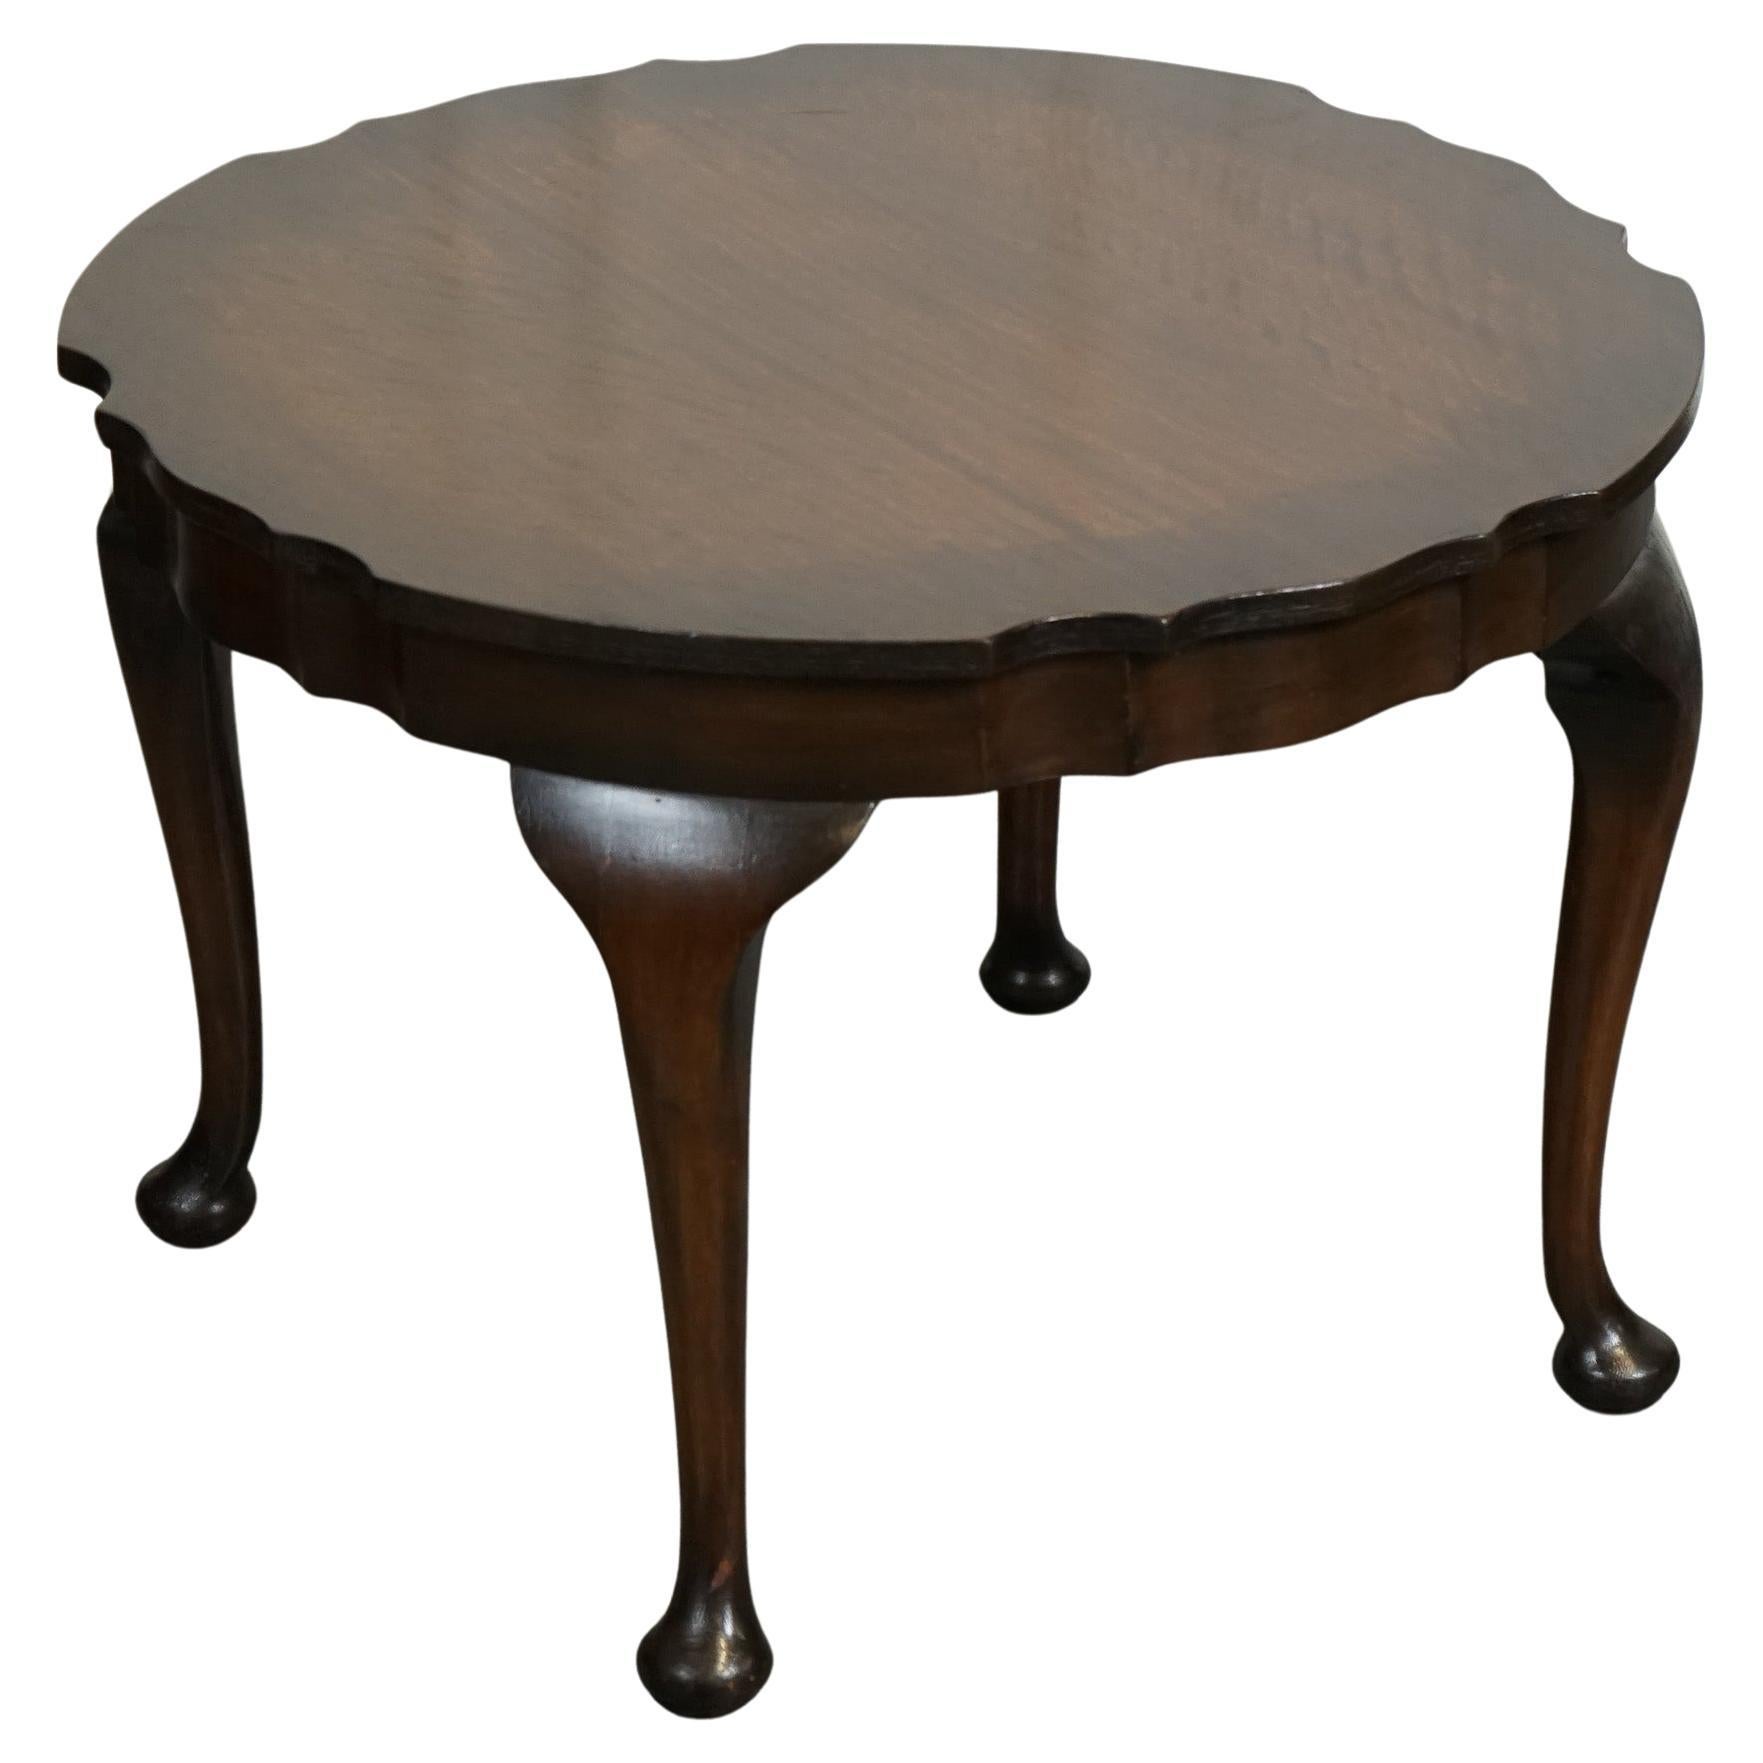 LOVELY SMALL PIE CRUST SHAPED EDGES HARDWOOD SIDE TABLE j1